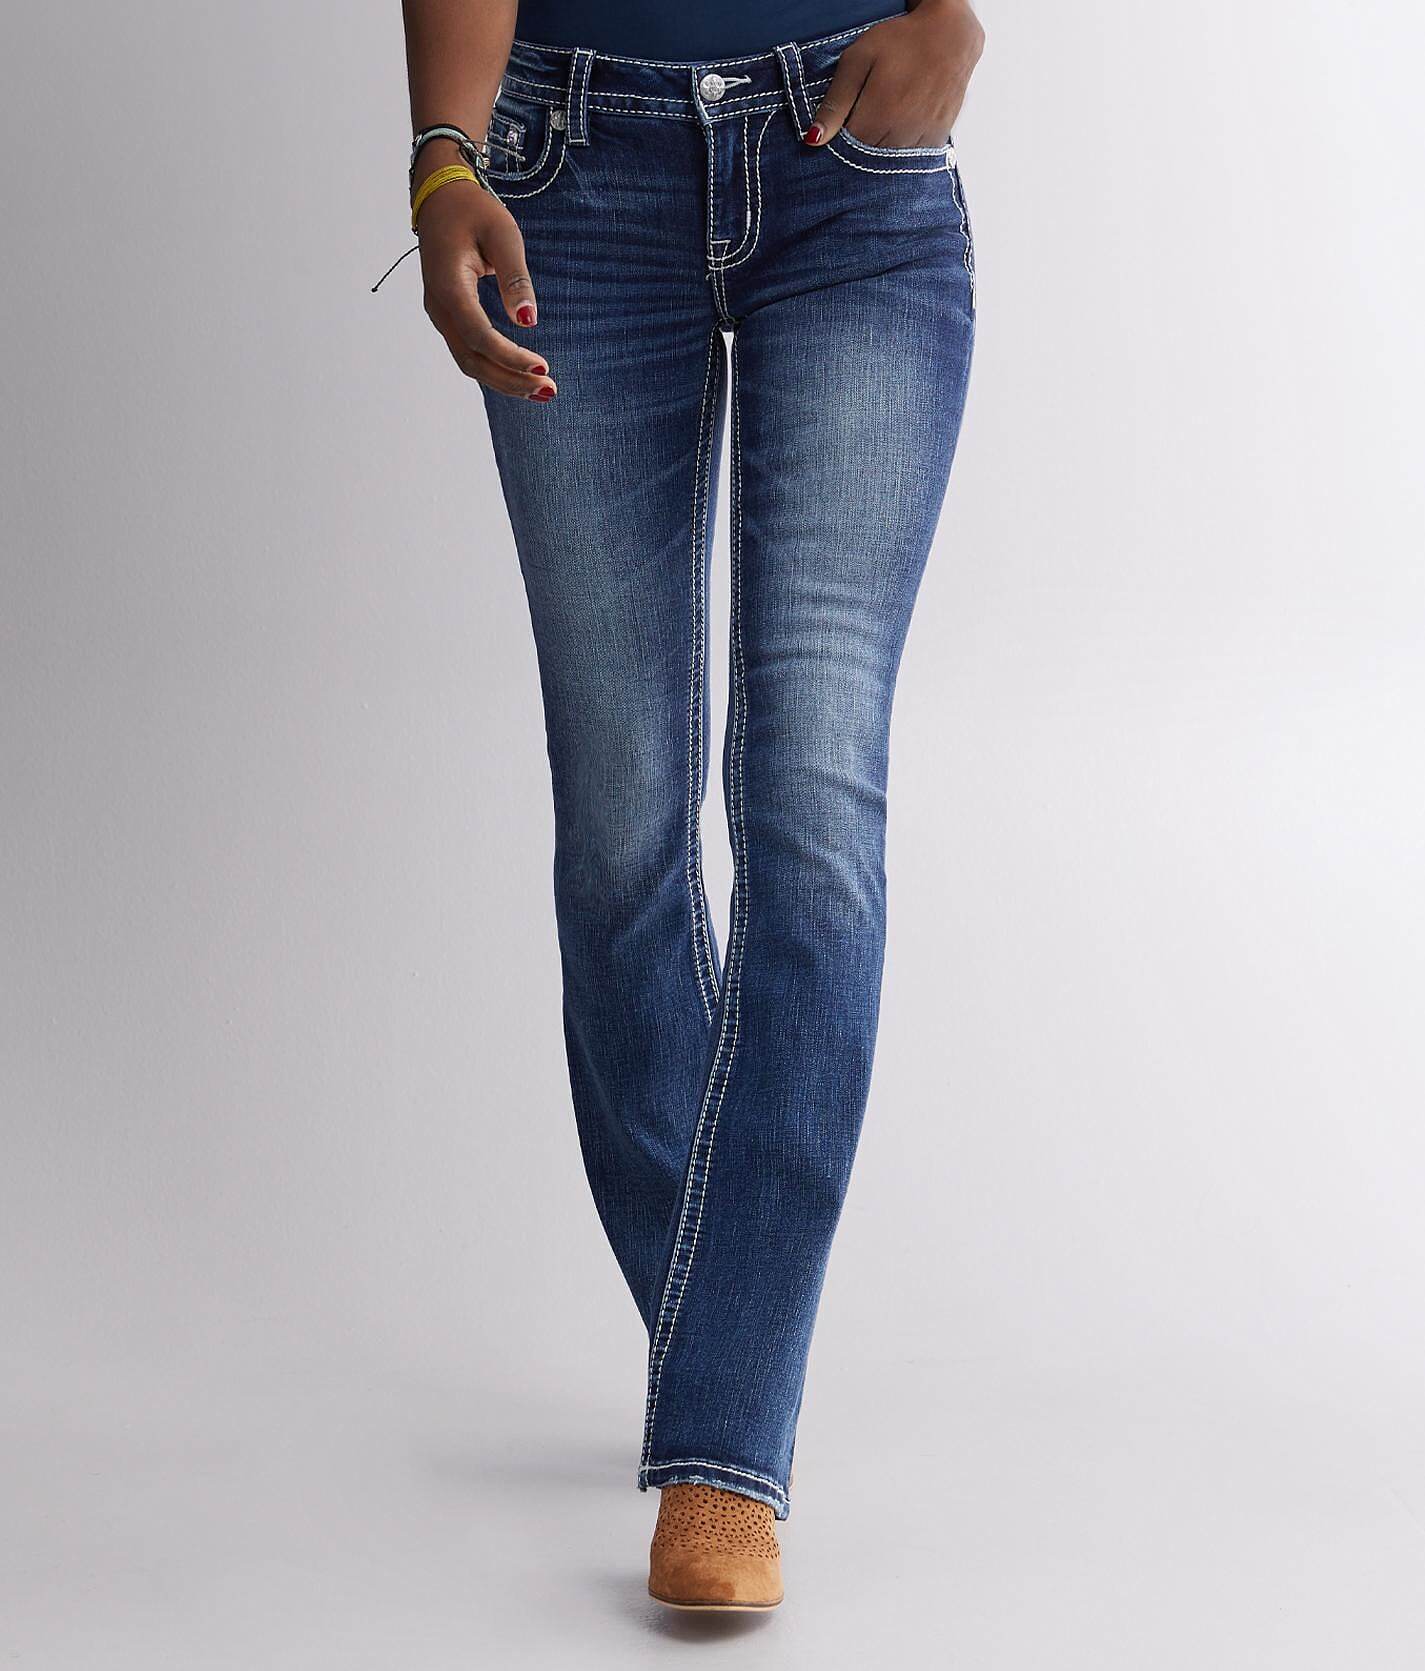 miss me chloe boot jeans